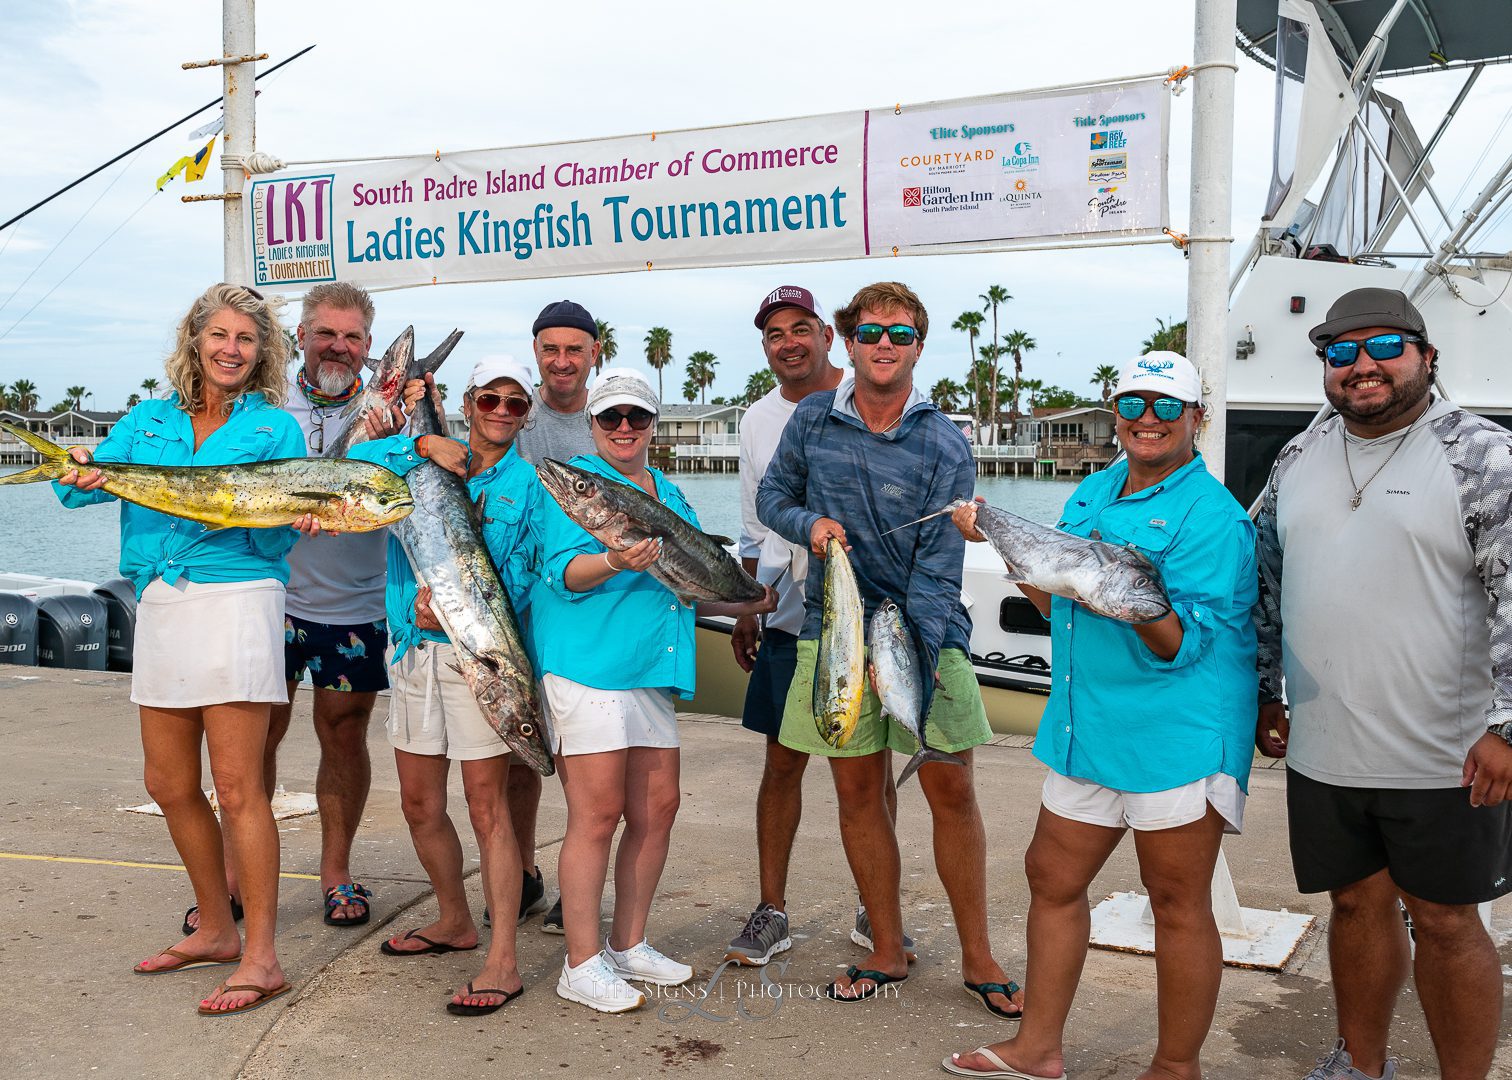 Register today for the 42nd Annual Ladies Kingfish Tournament in